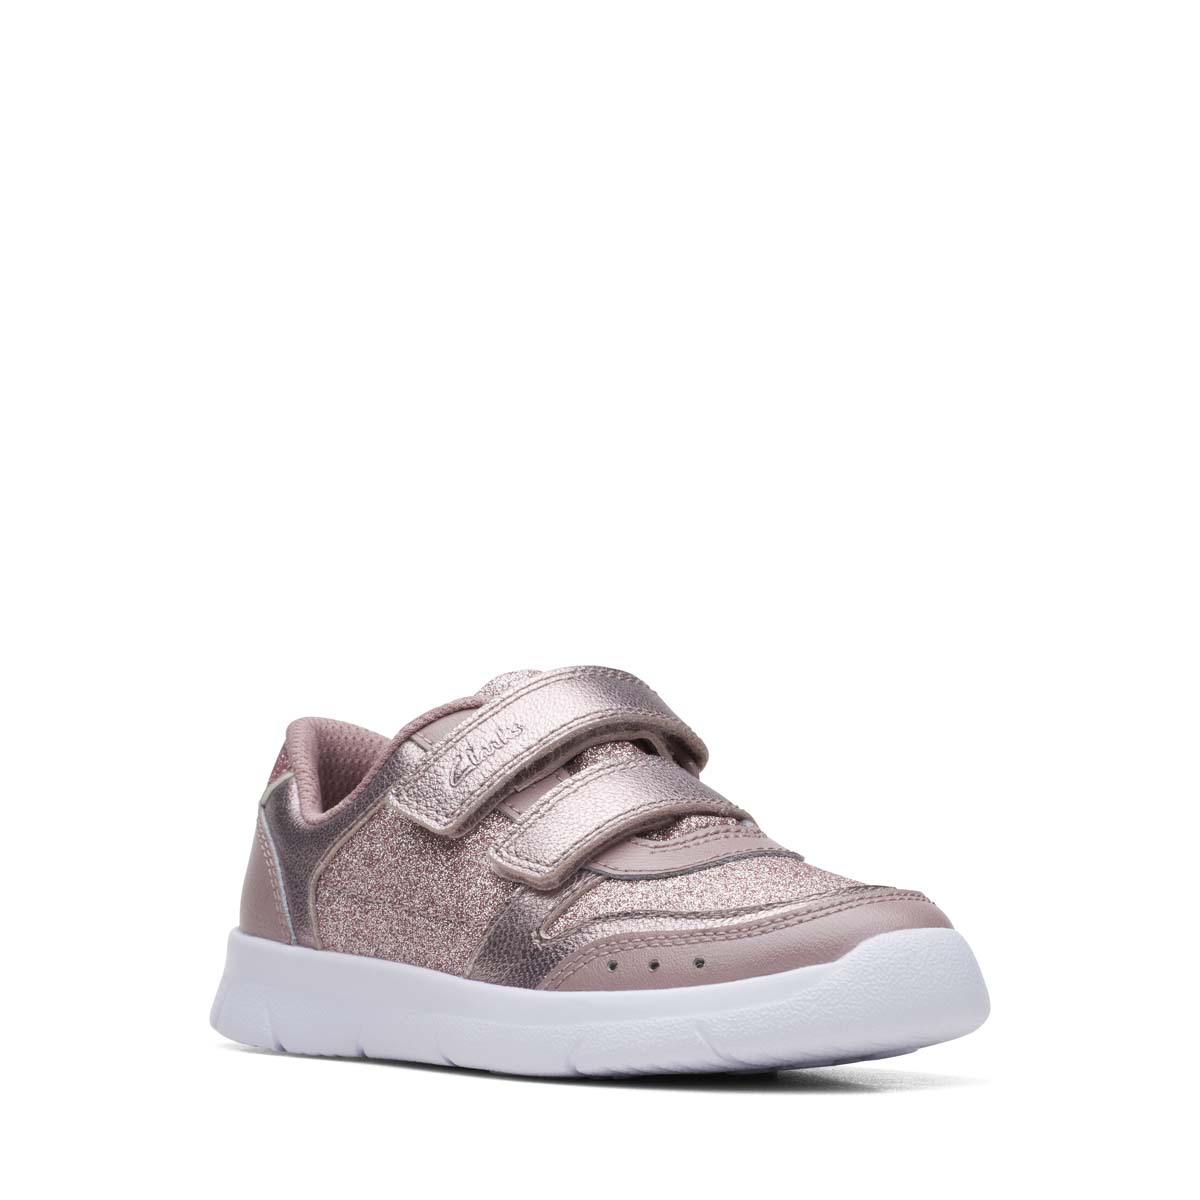 Clarks Ath Sonar K Pink Kids toddler girls trainers 6886-86F in a Plain Leather in Size 9